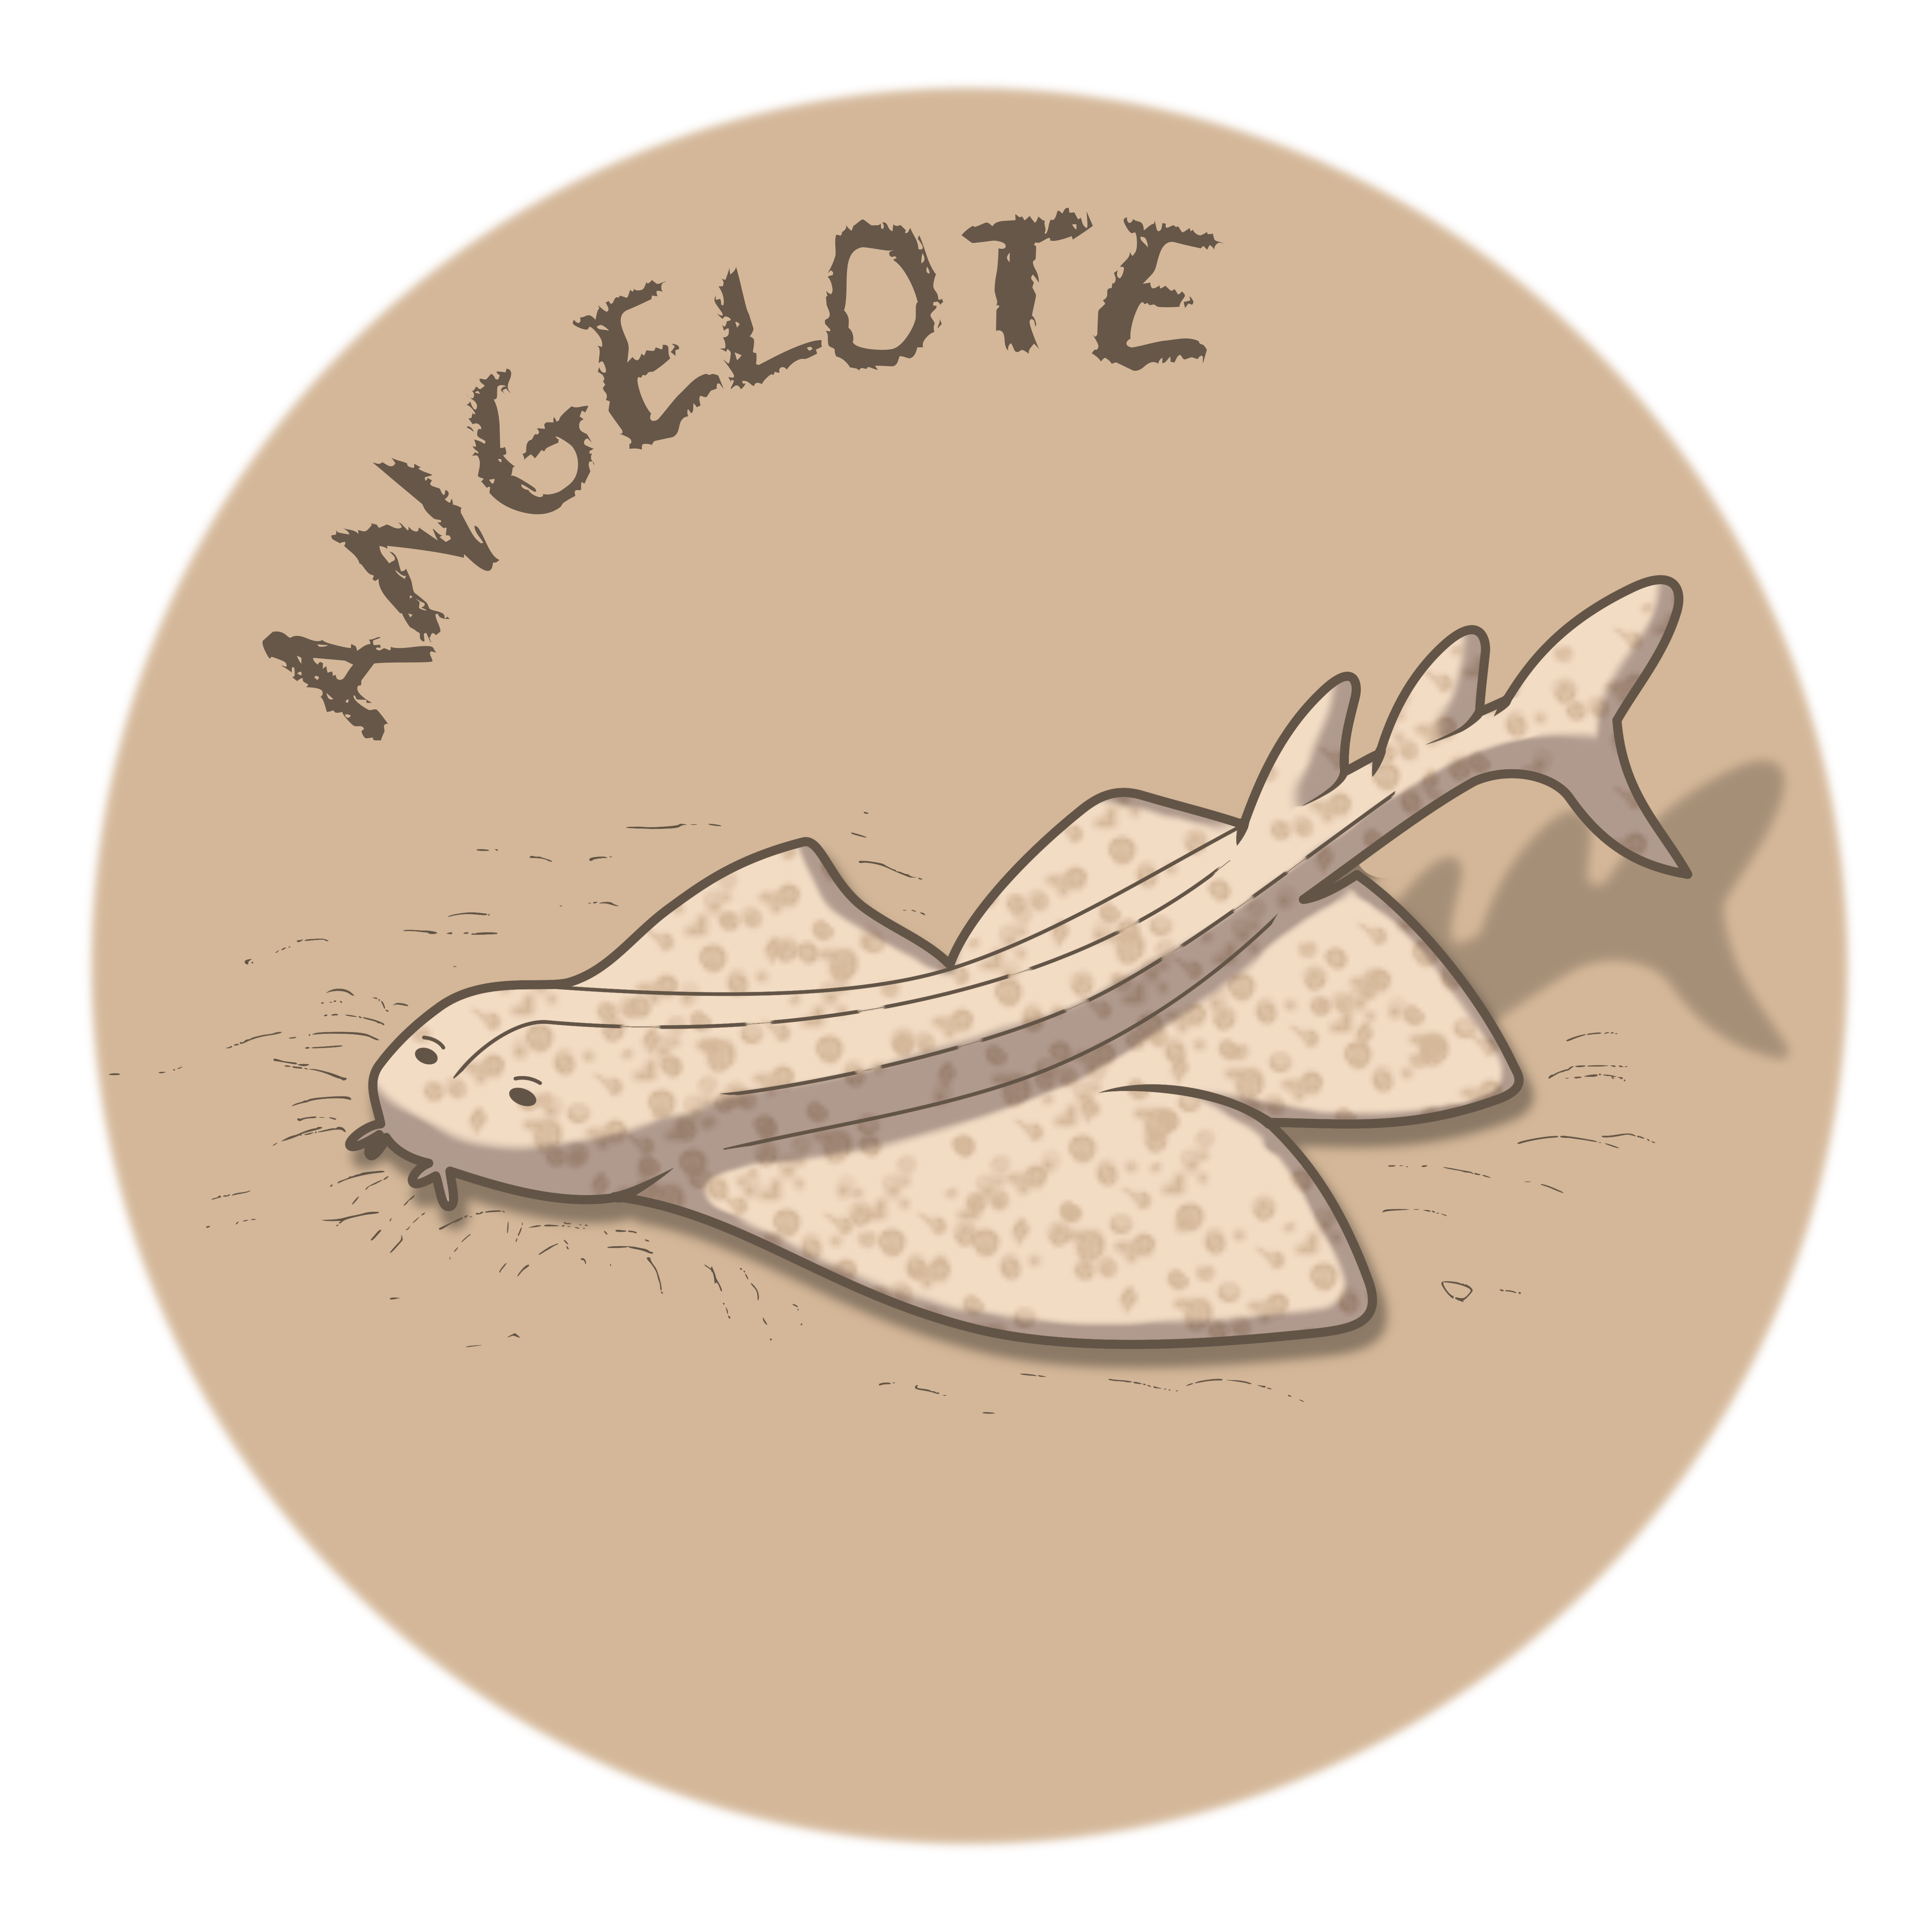 Angelote